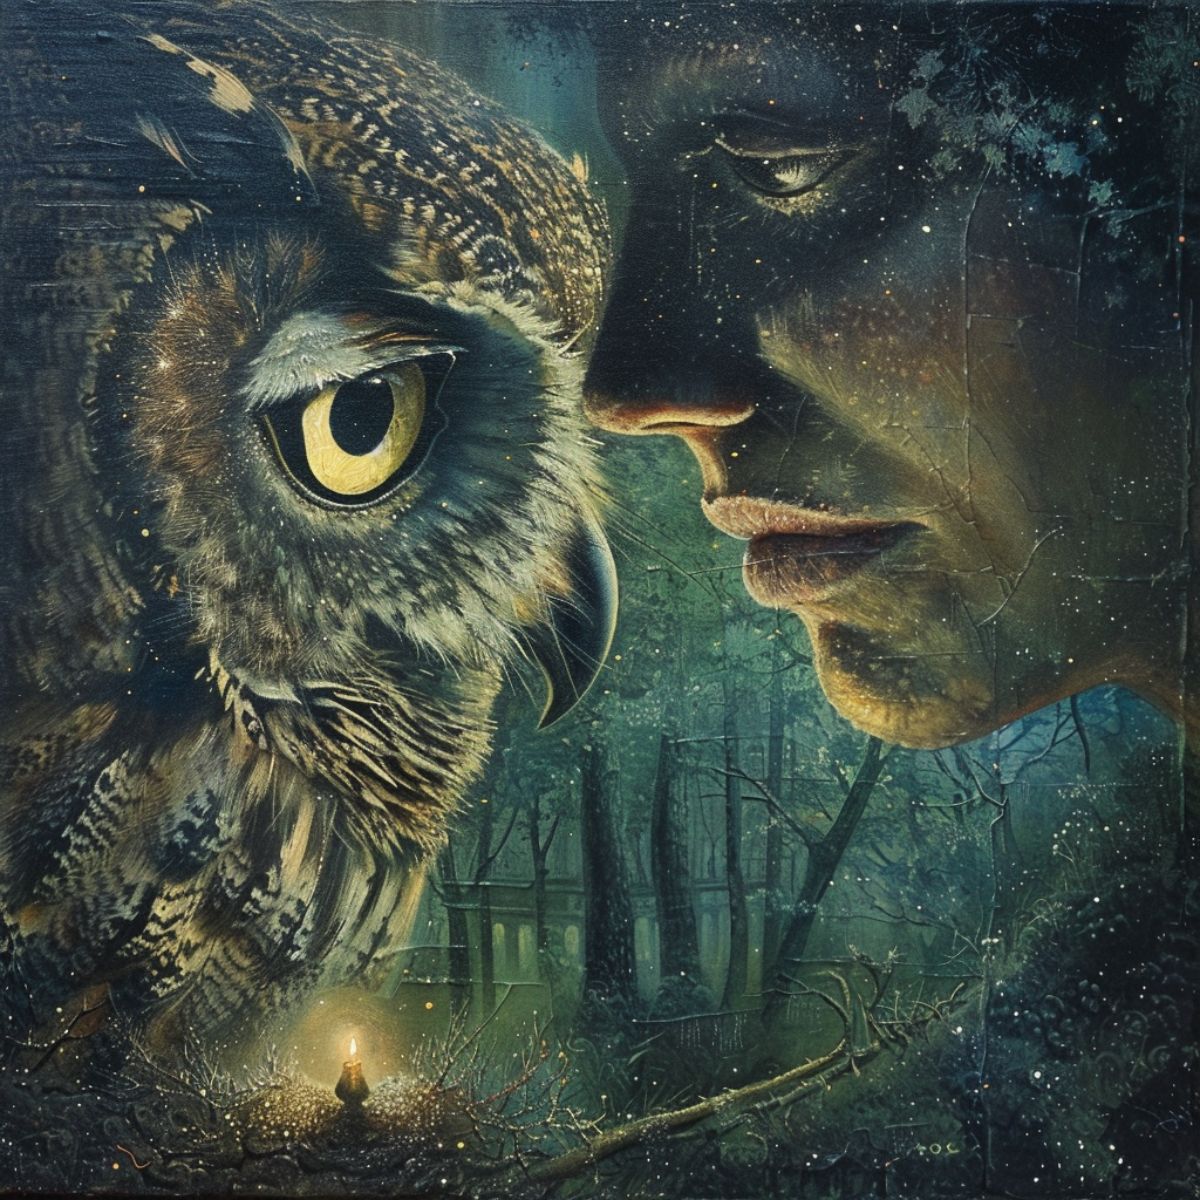 Spiritual meaning of owls